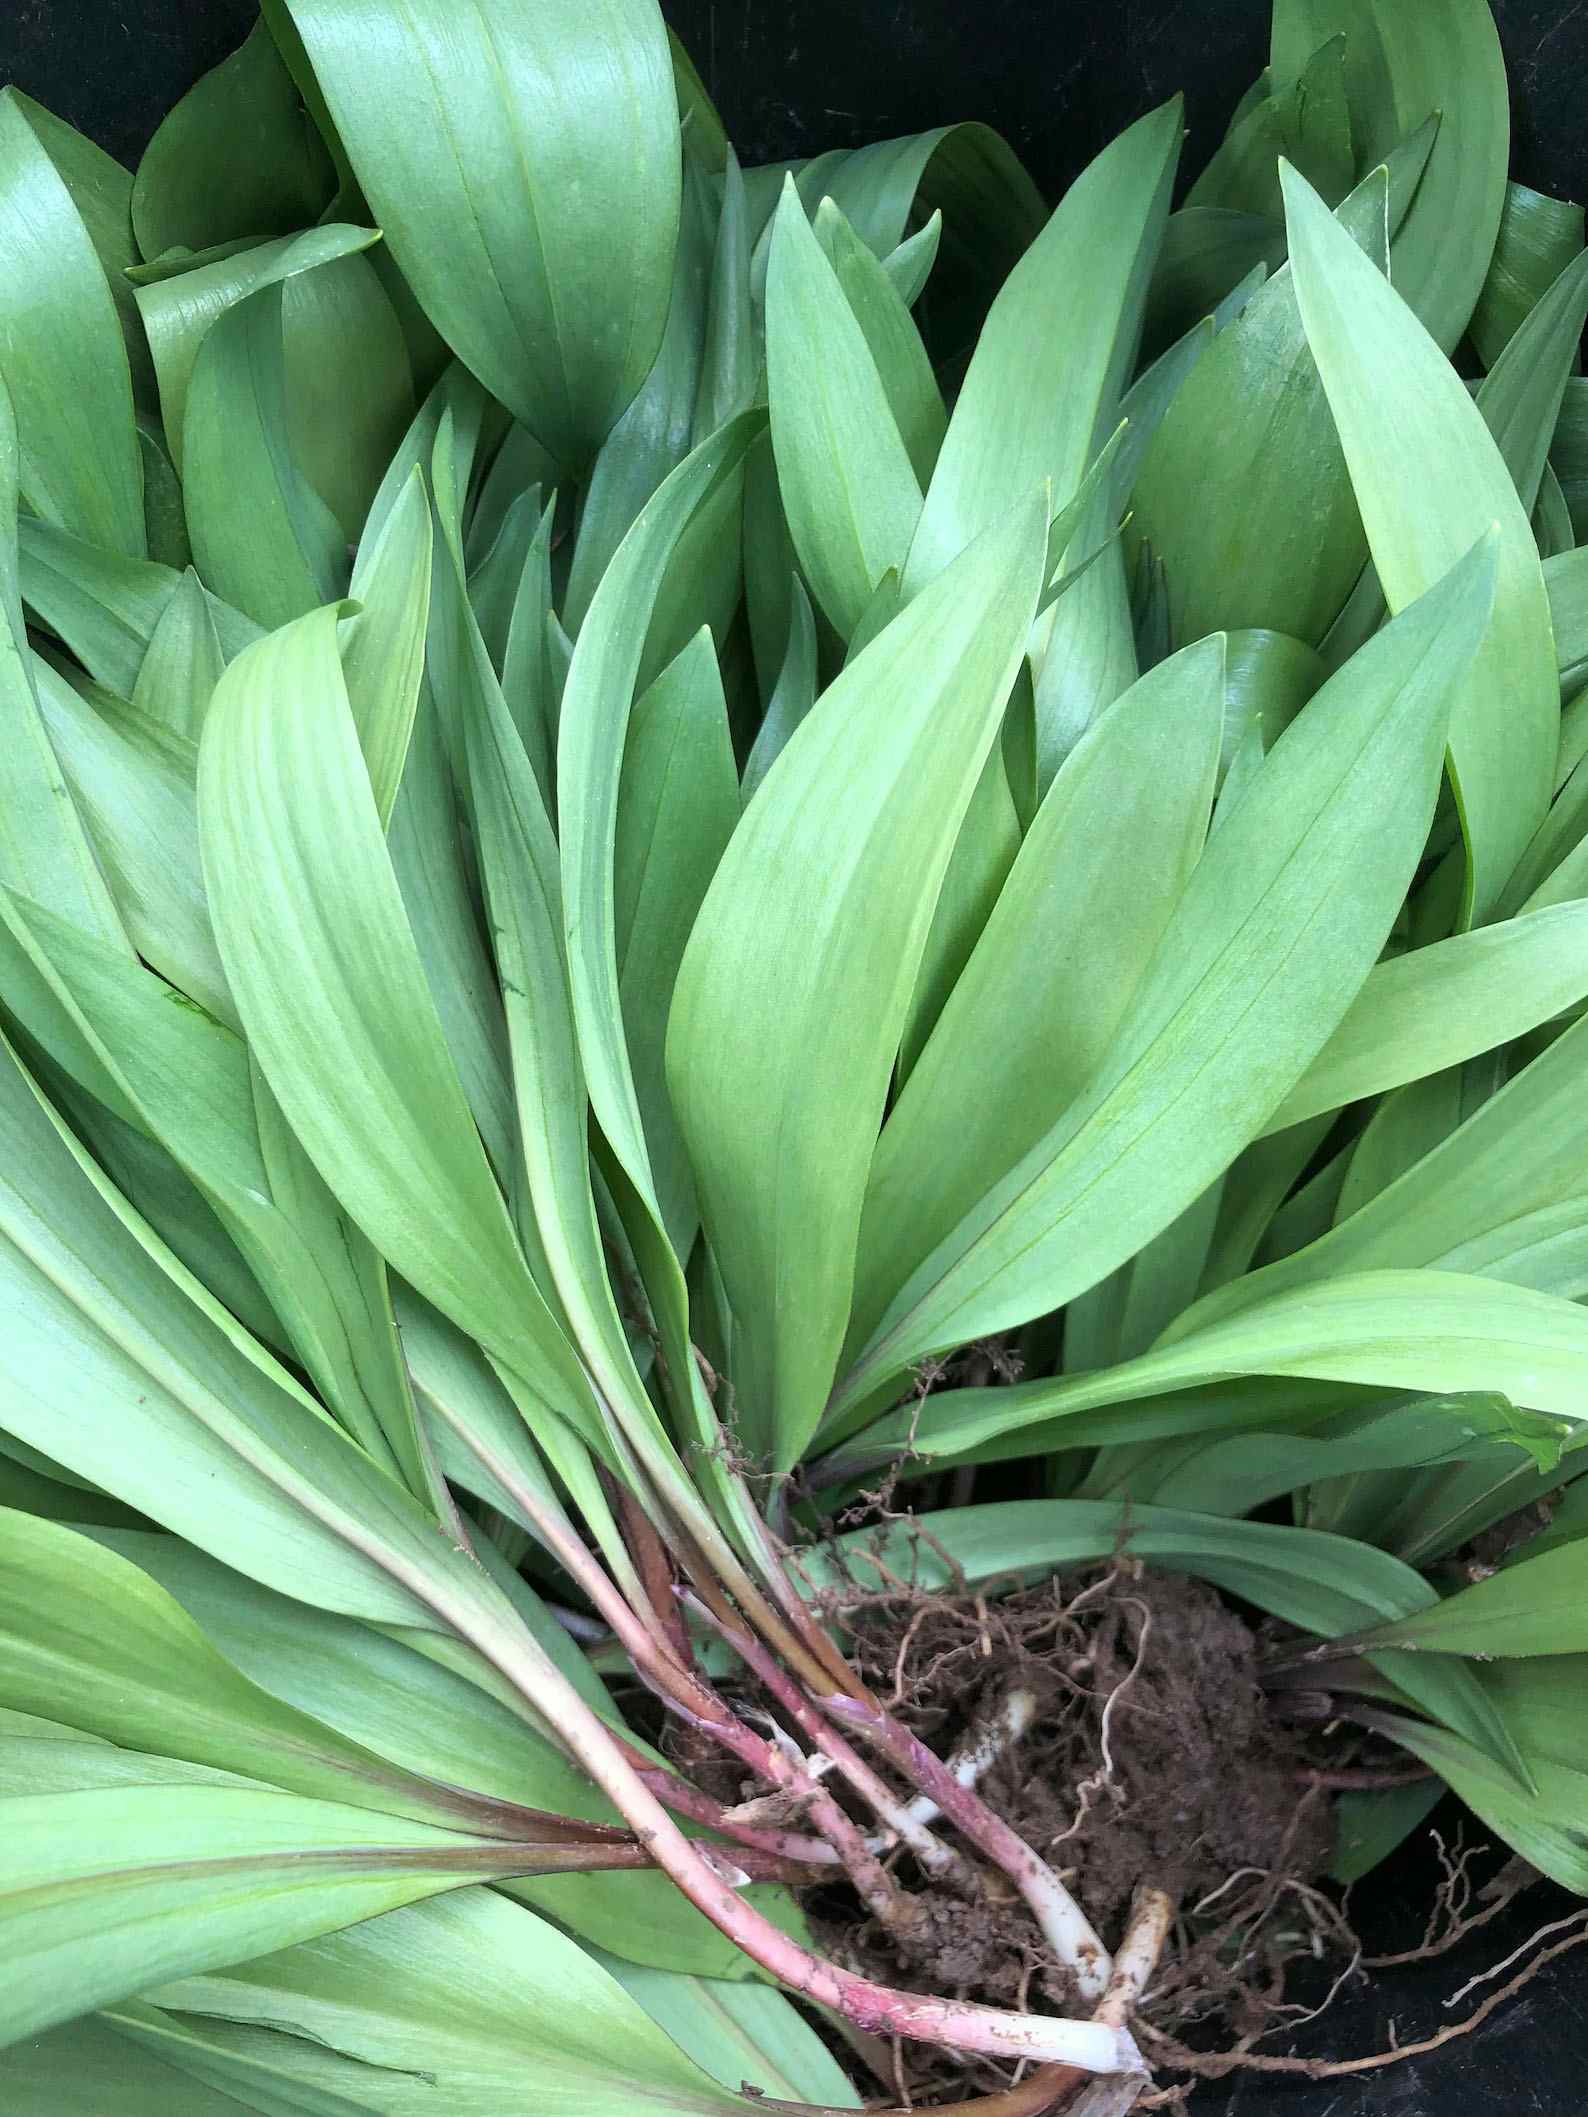 Grow your own! Restore the Ramp Patches! Bulbs of Ethically and Sustainably harvested Wild Ramps var Allium Tricoccum bulbs